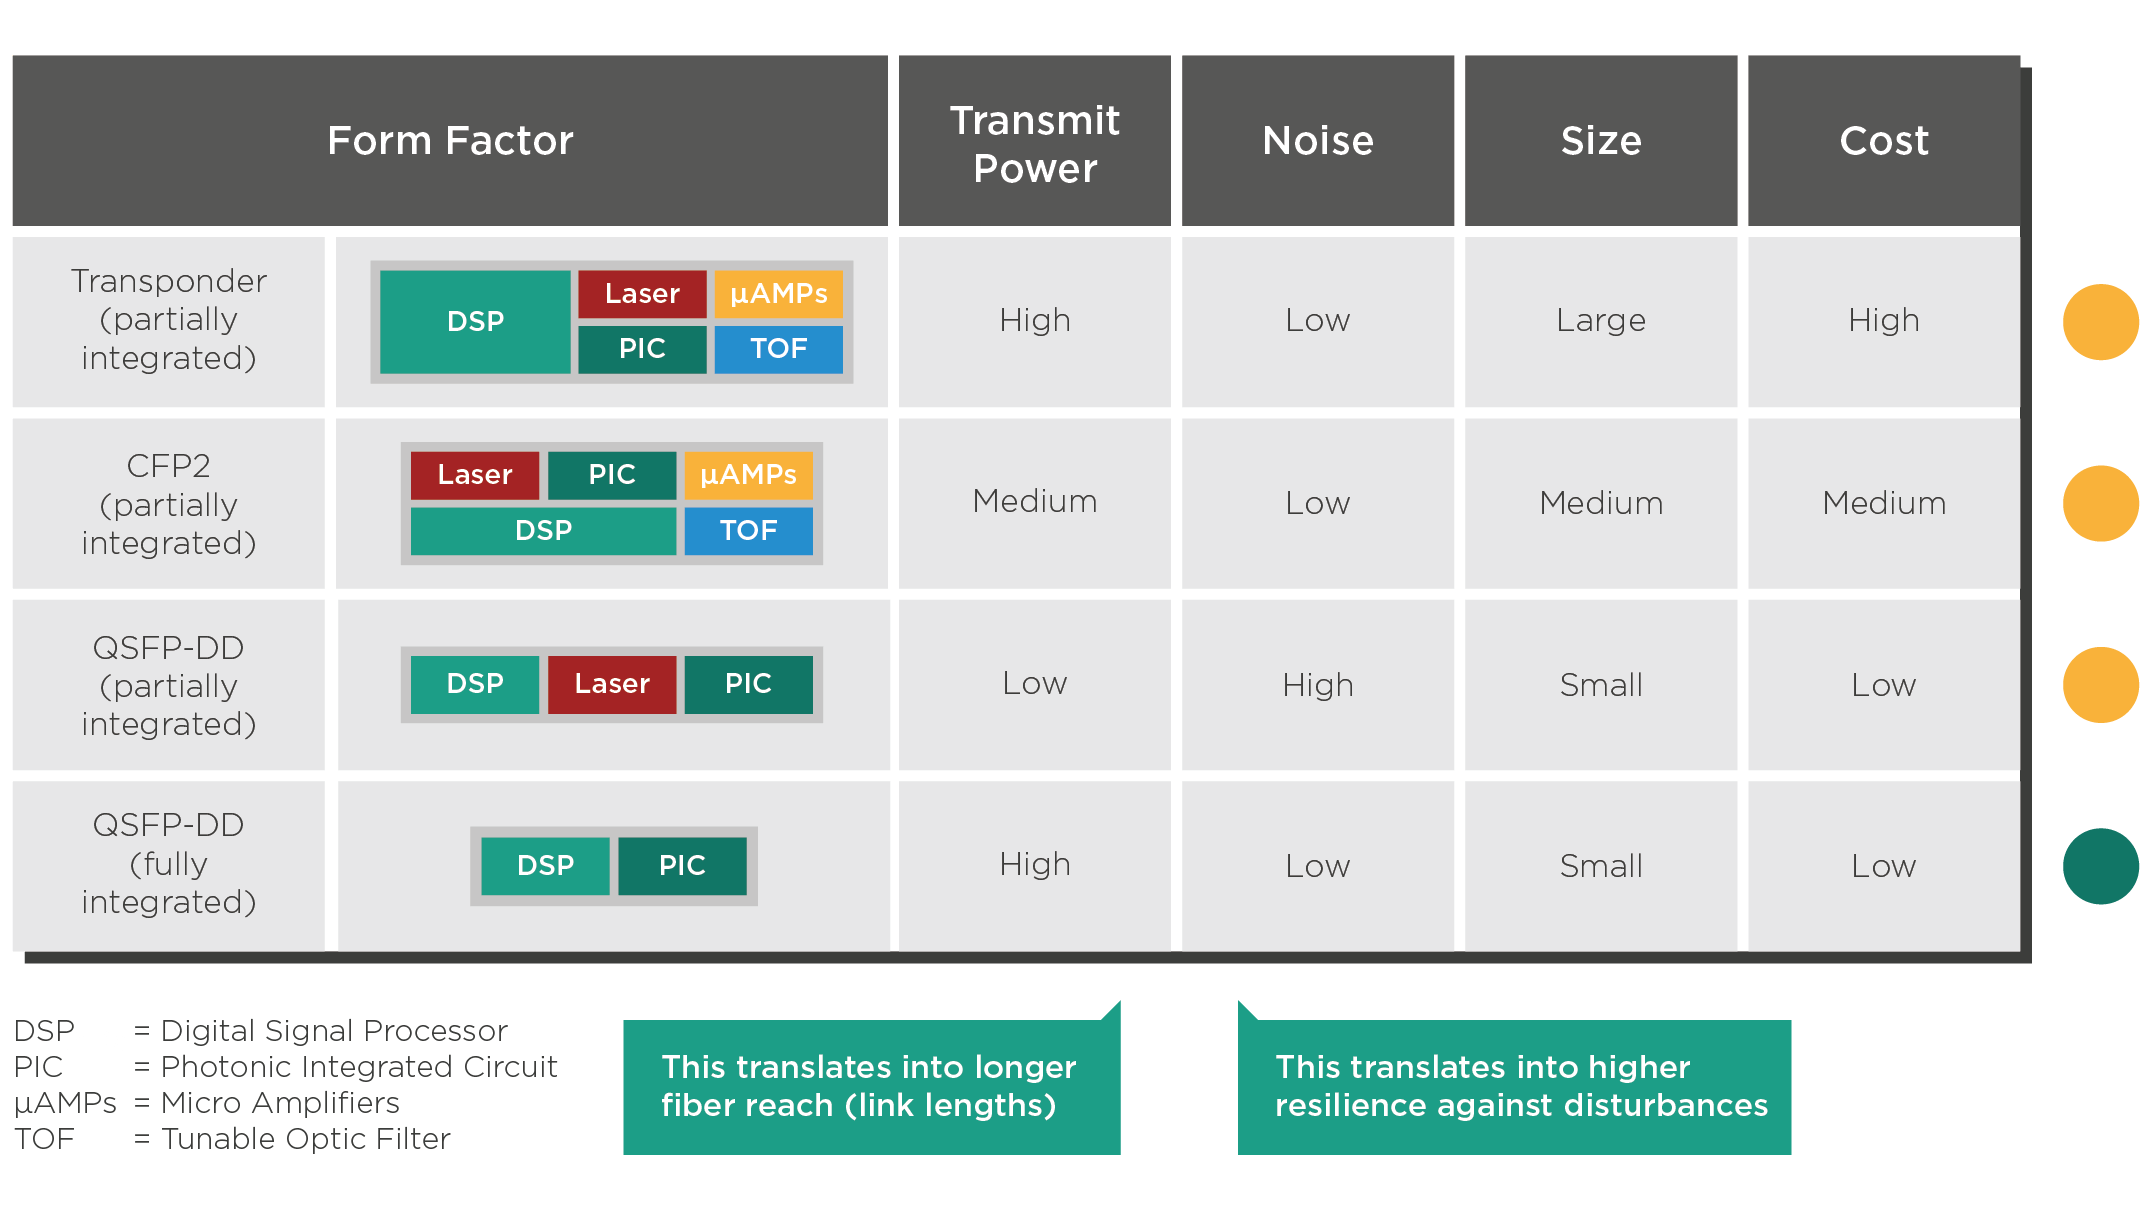 Figure 2: Comparing transmit power, noise, size, and cost of line card transponders and different transceiver pluggable modules. Fully integrated QSFP-DD modules include lasers, amplifiers, and filters inside a single PIC, so they can deliver high transmit powers at small size and low cost.